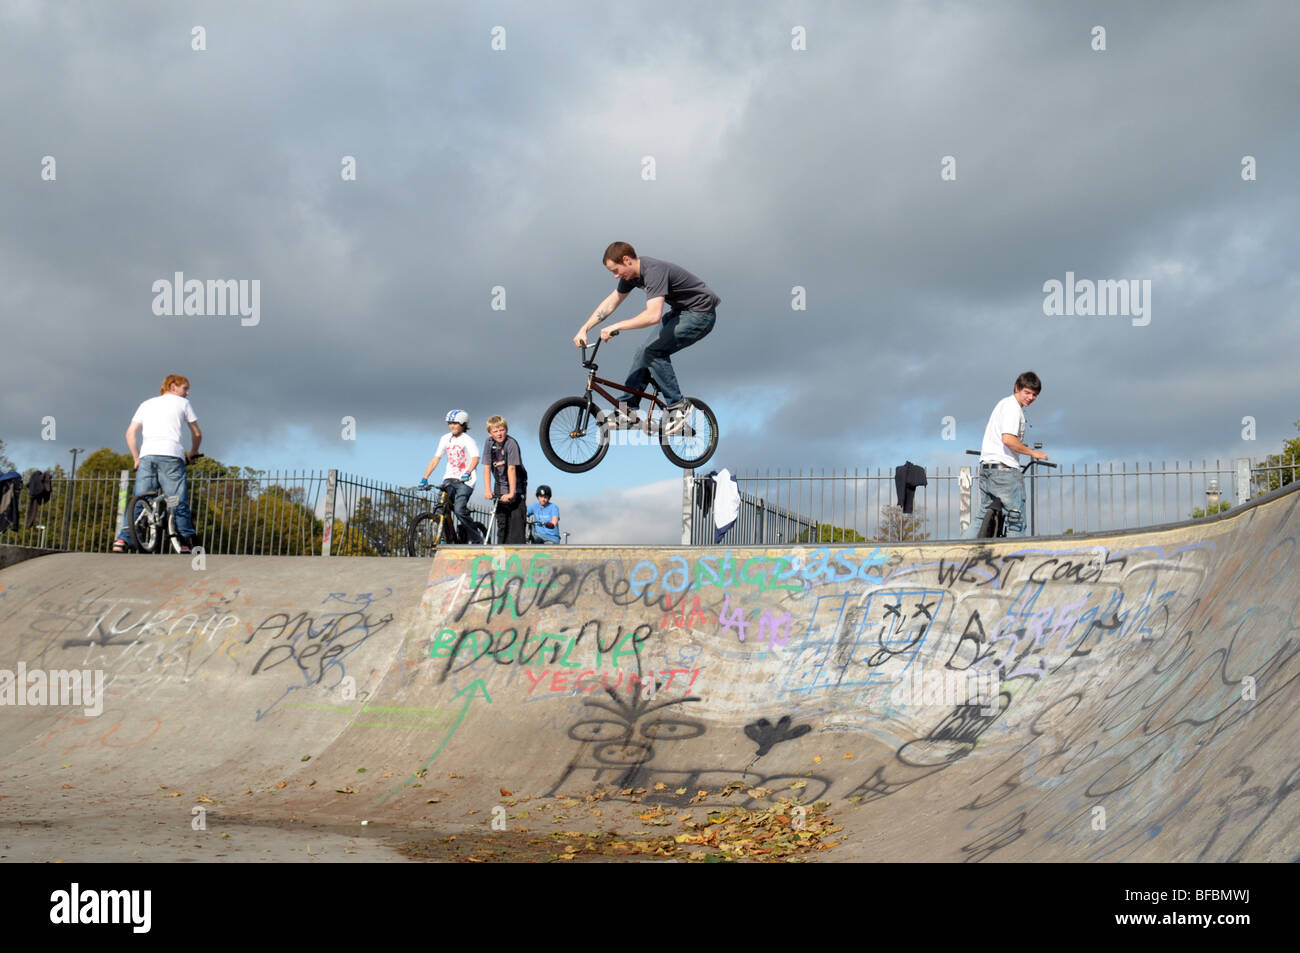 Kids and teenagers aged from around 10yrs to 16yrs playing in a skatepark. Stock Photo